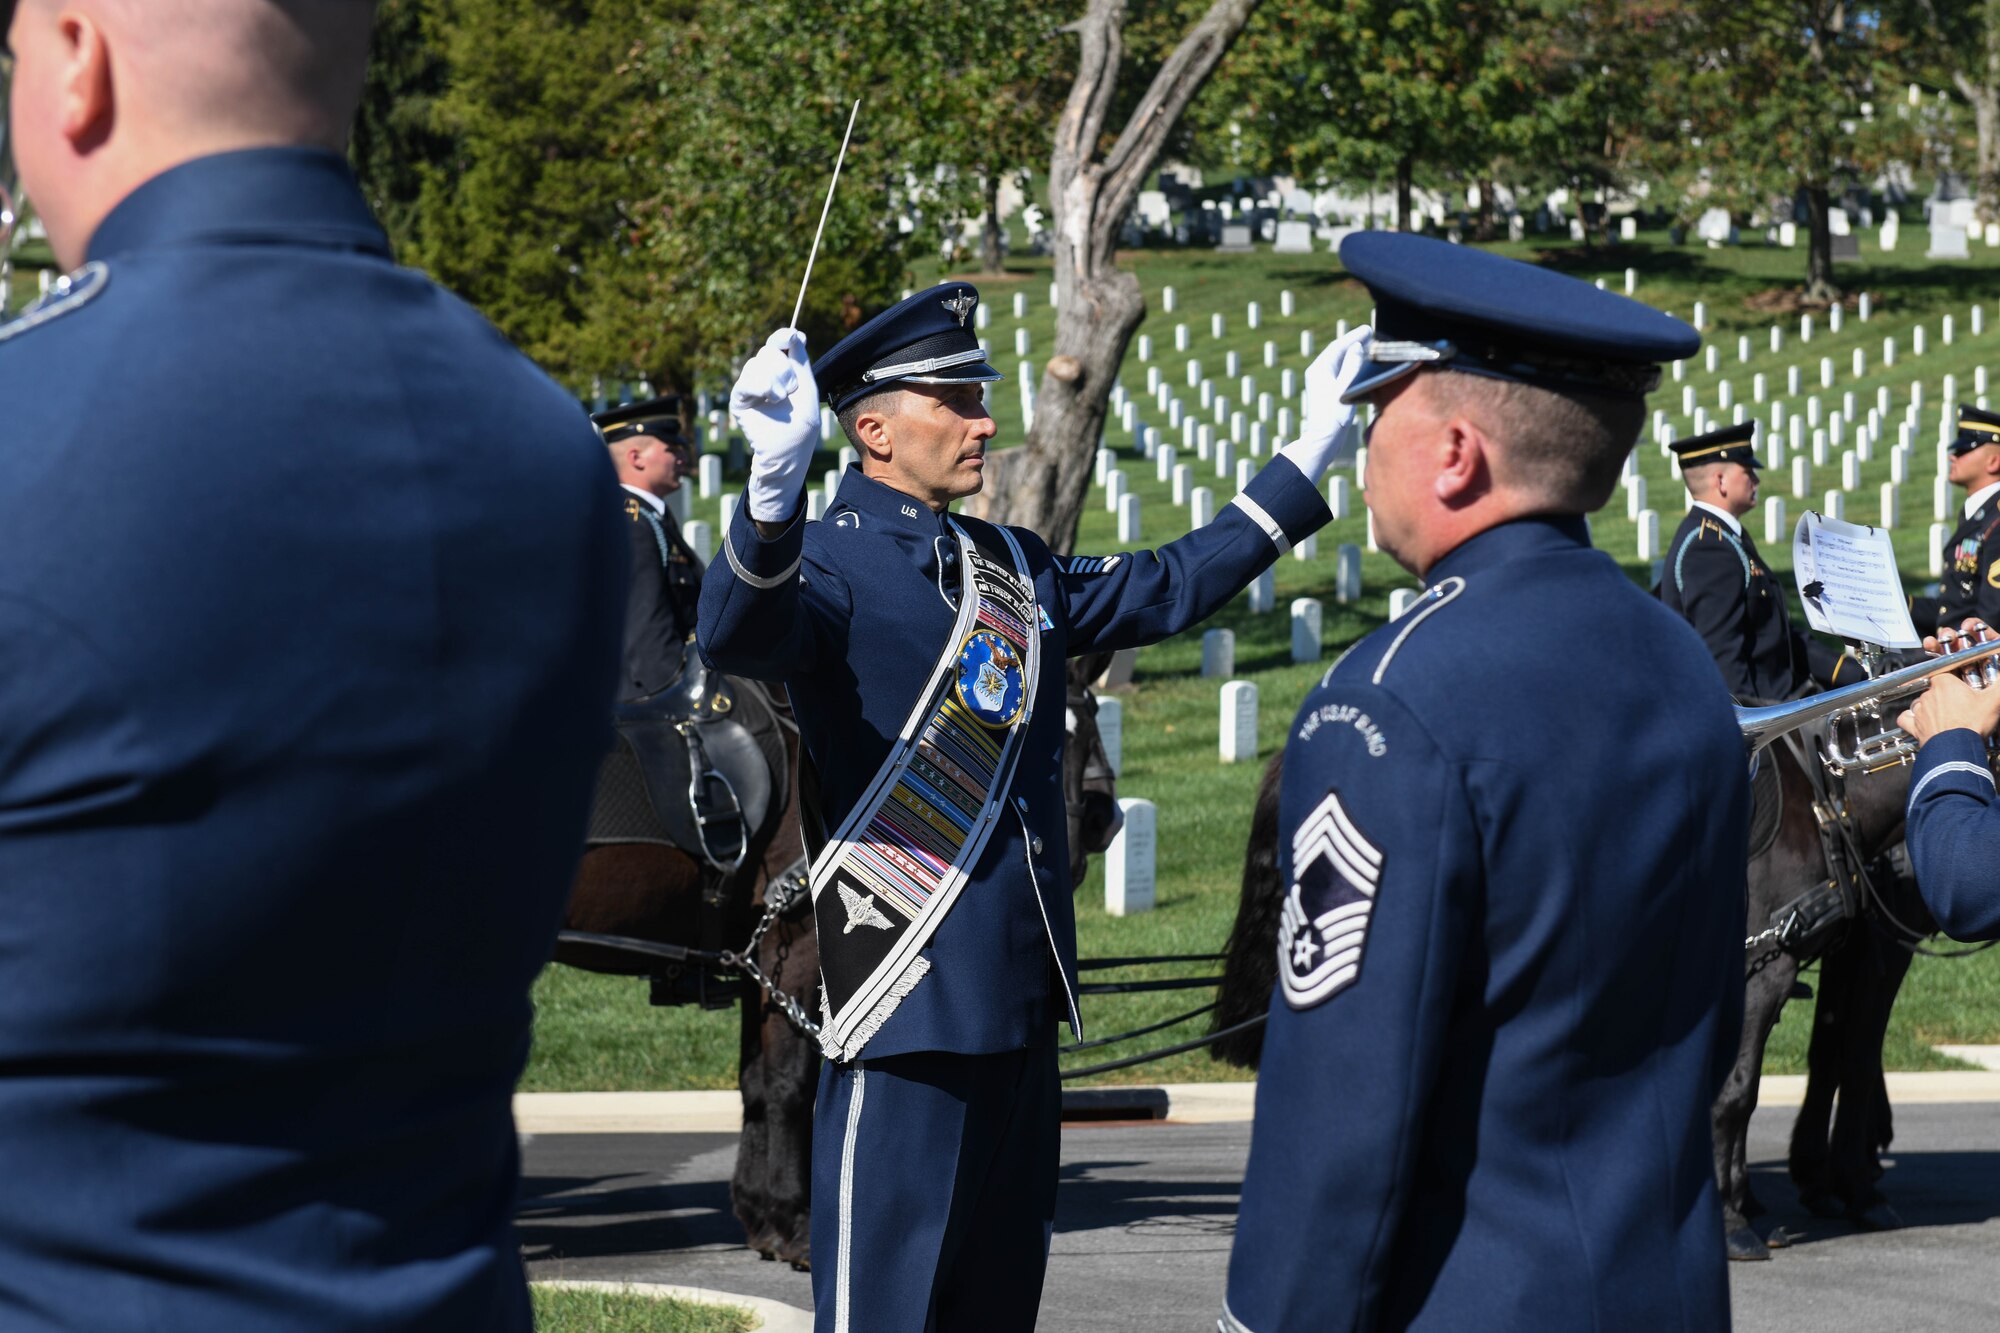 Seventy years after the disappearance of a C-124 Globlemaster II over the Atlantic Ocean, members of the 509th Bomb Wing honored, U.S. Lt. Col. James I. Hopkins, during a memorial ceremony at Arlington National Cemetery.